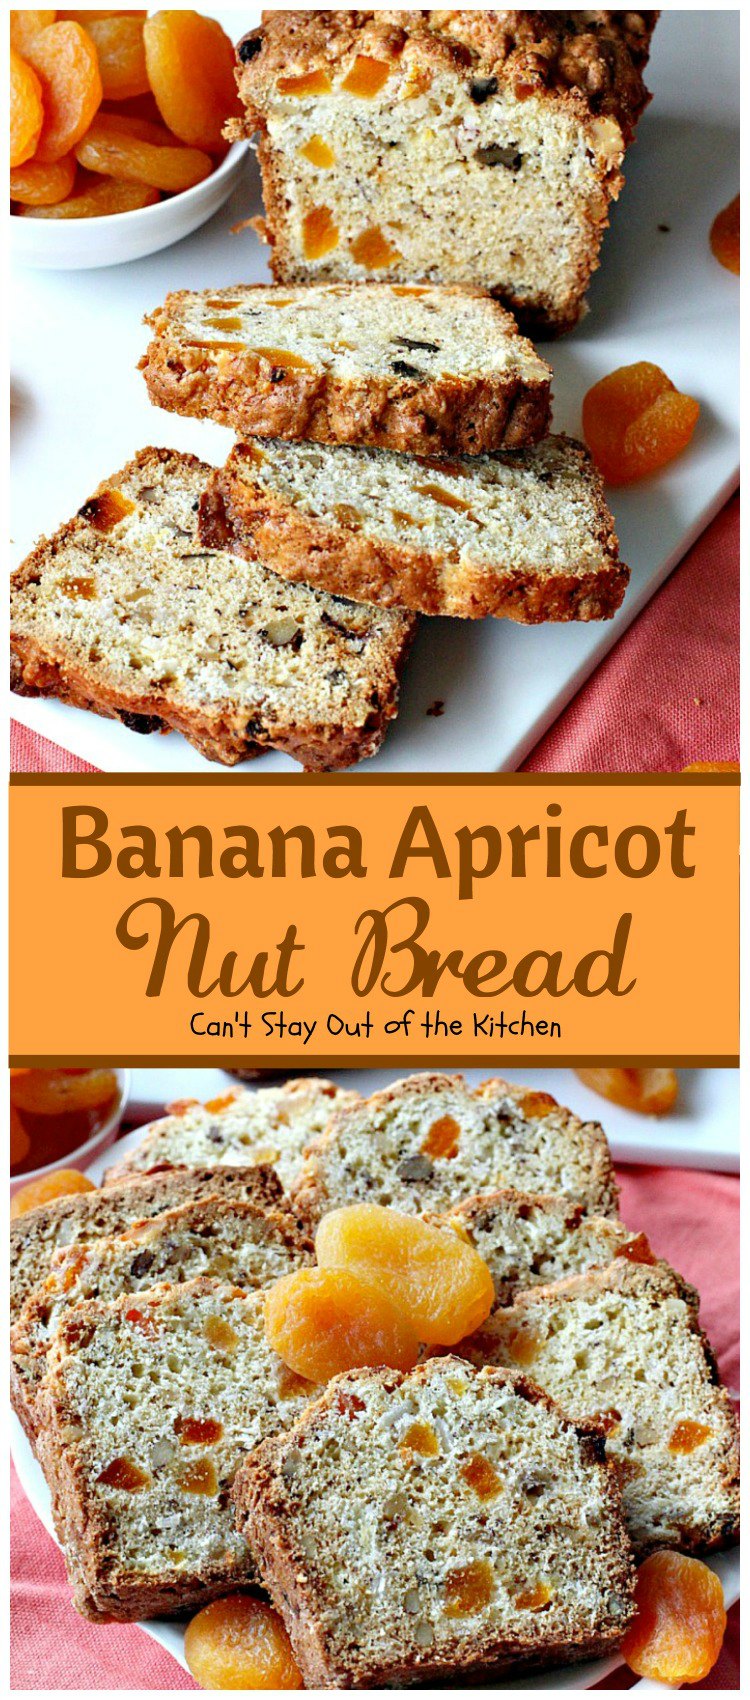 Banana Apricot Nut Bread | Can't Stay Out of the KitchenBanana Apricot Nut Bread | Can't Stay Out of the Kitchen